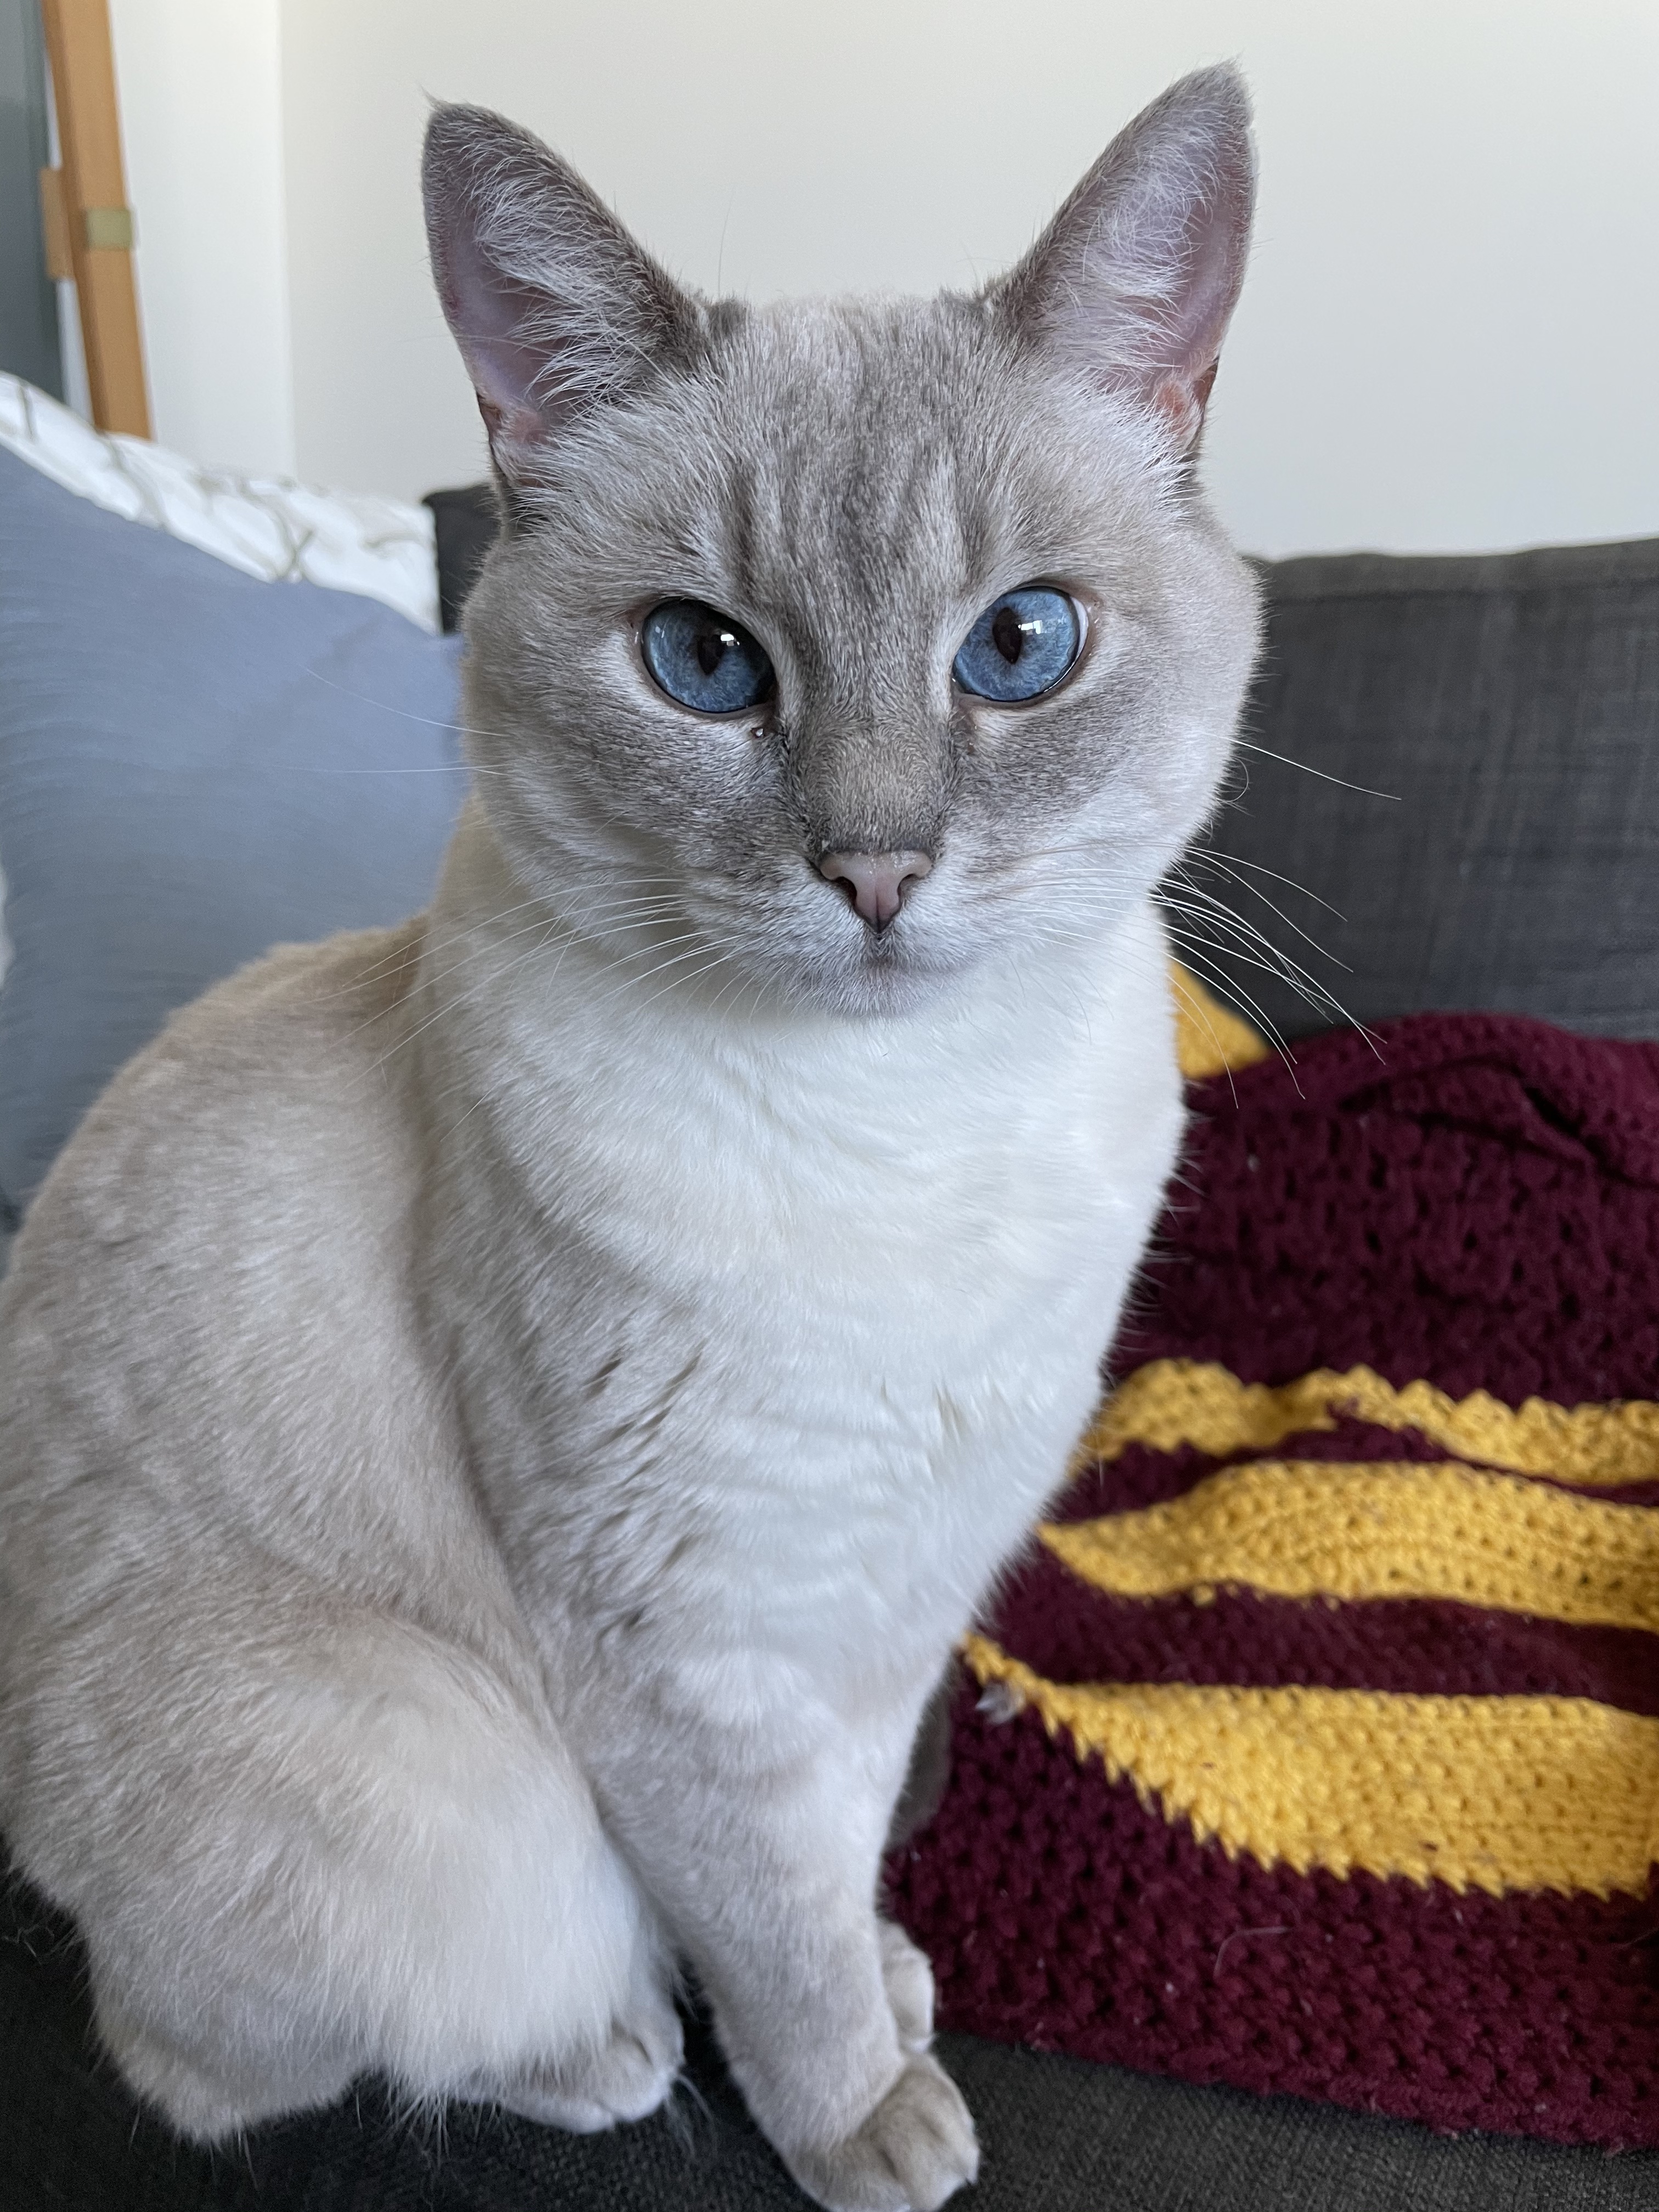 Gray cat with blue eyes sitting regally on a couch